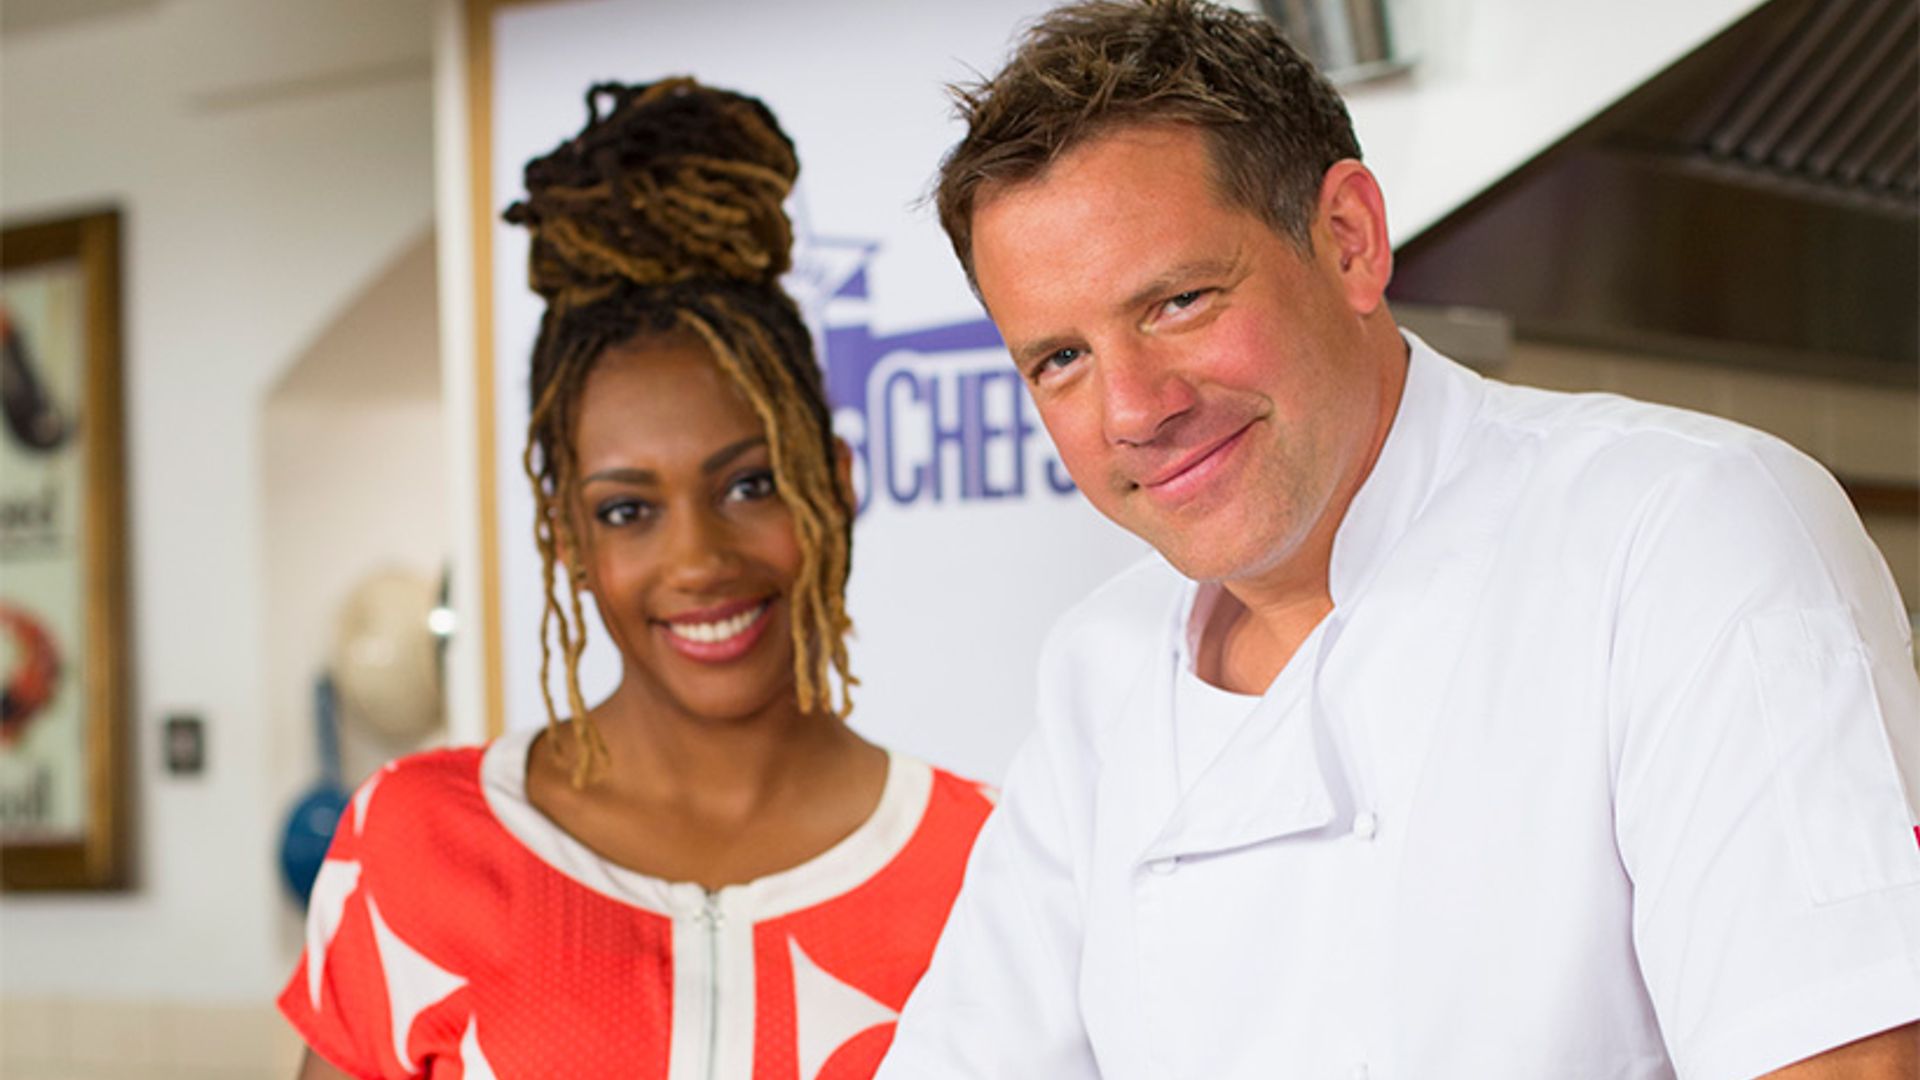 Matt Tebbutt shares his top healthy snack recipes to make with children